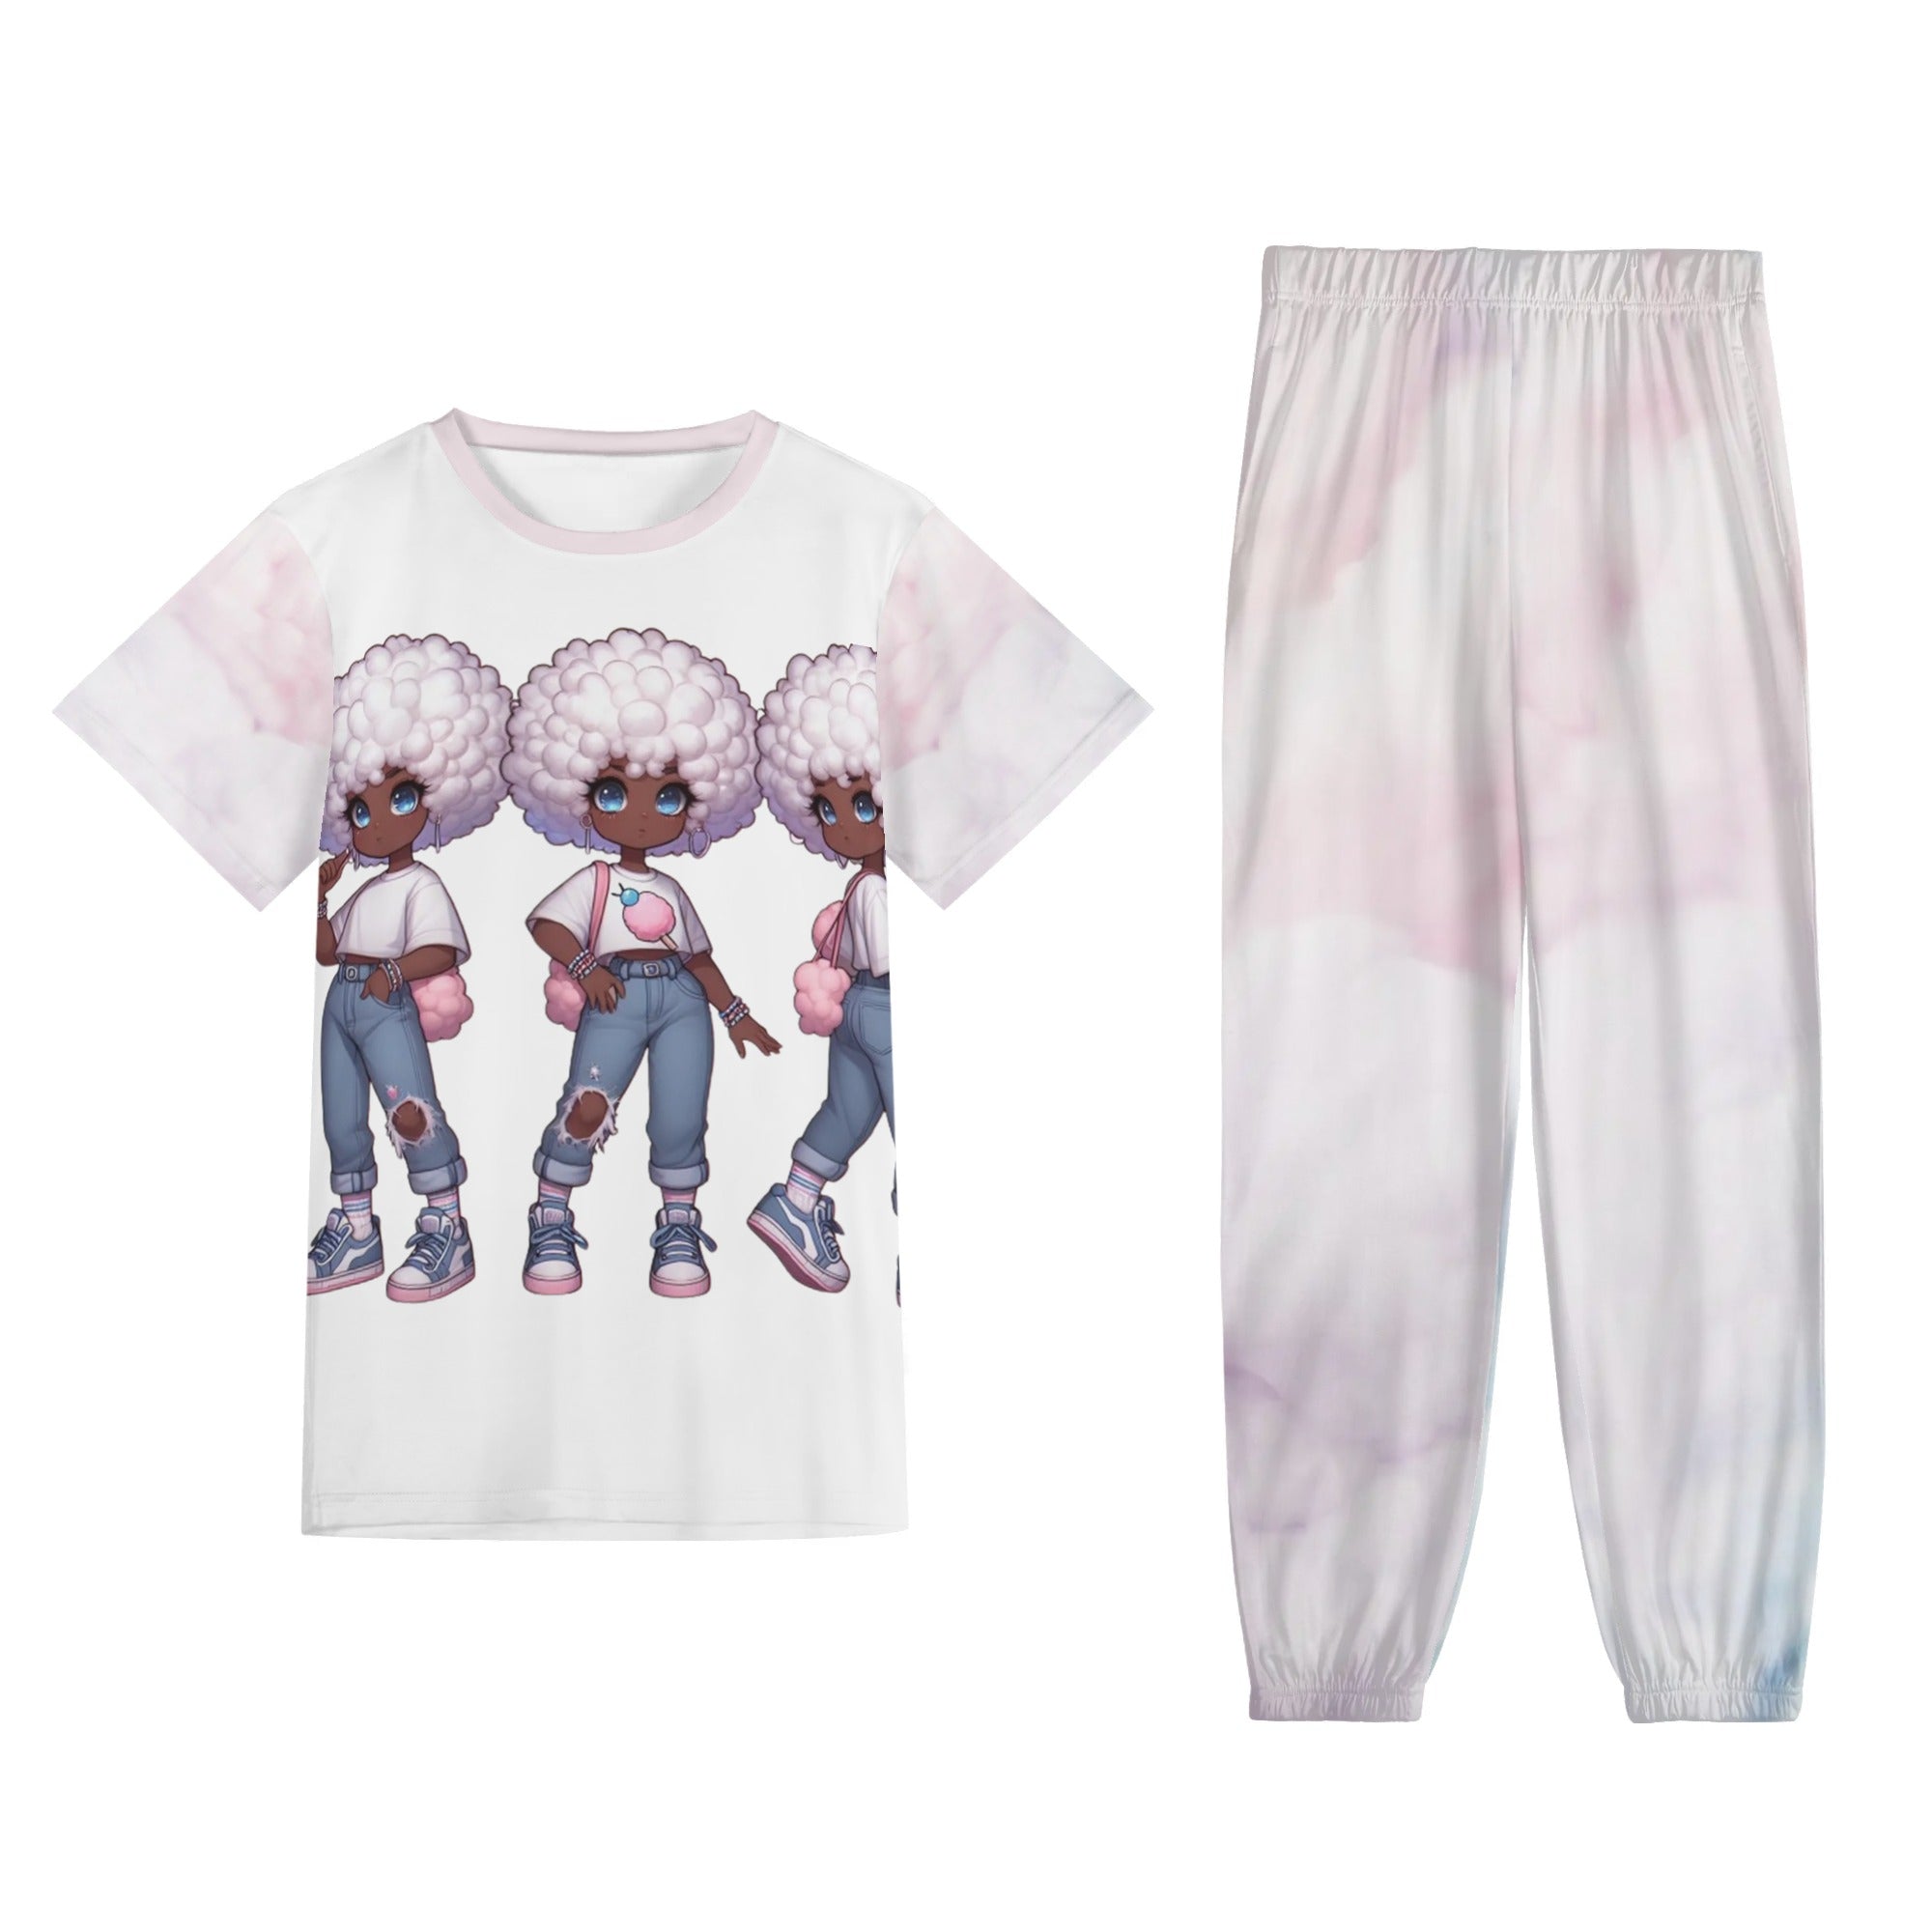 5XL - Cotton Candy Stylie Teens and Womens Short Sleeve Sports Outfit Set - at TFC&H Co.